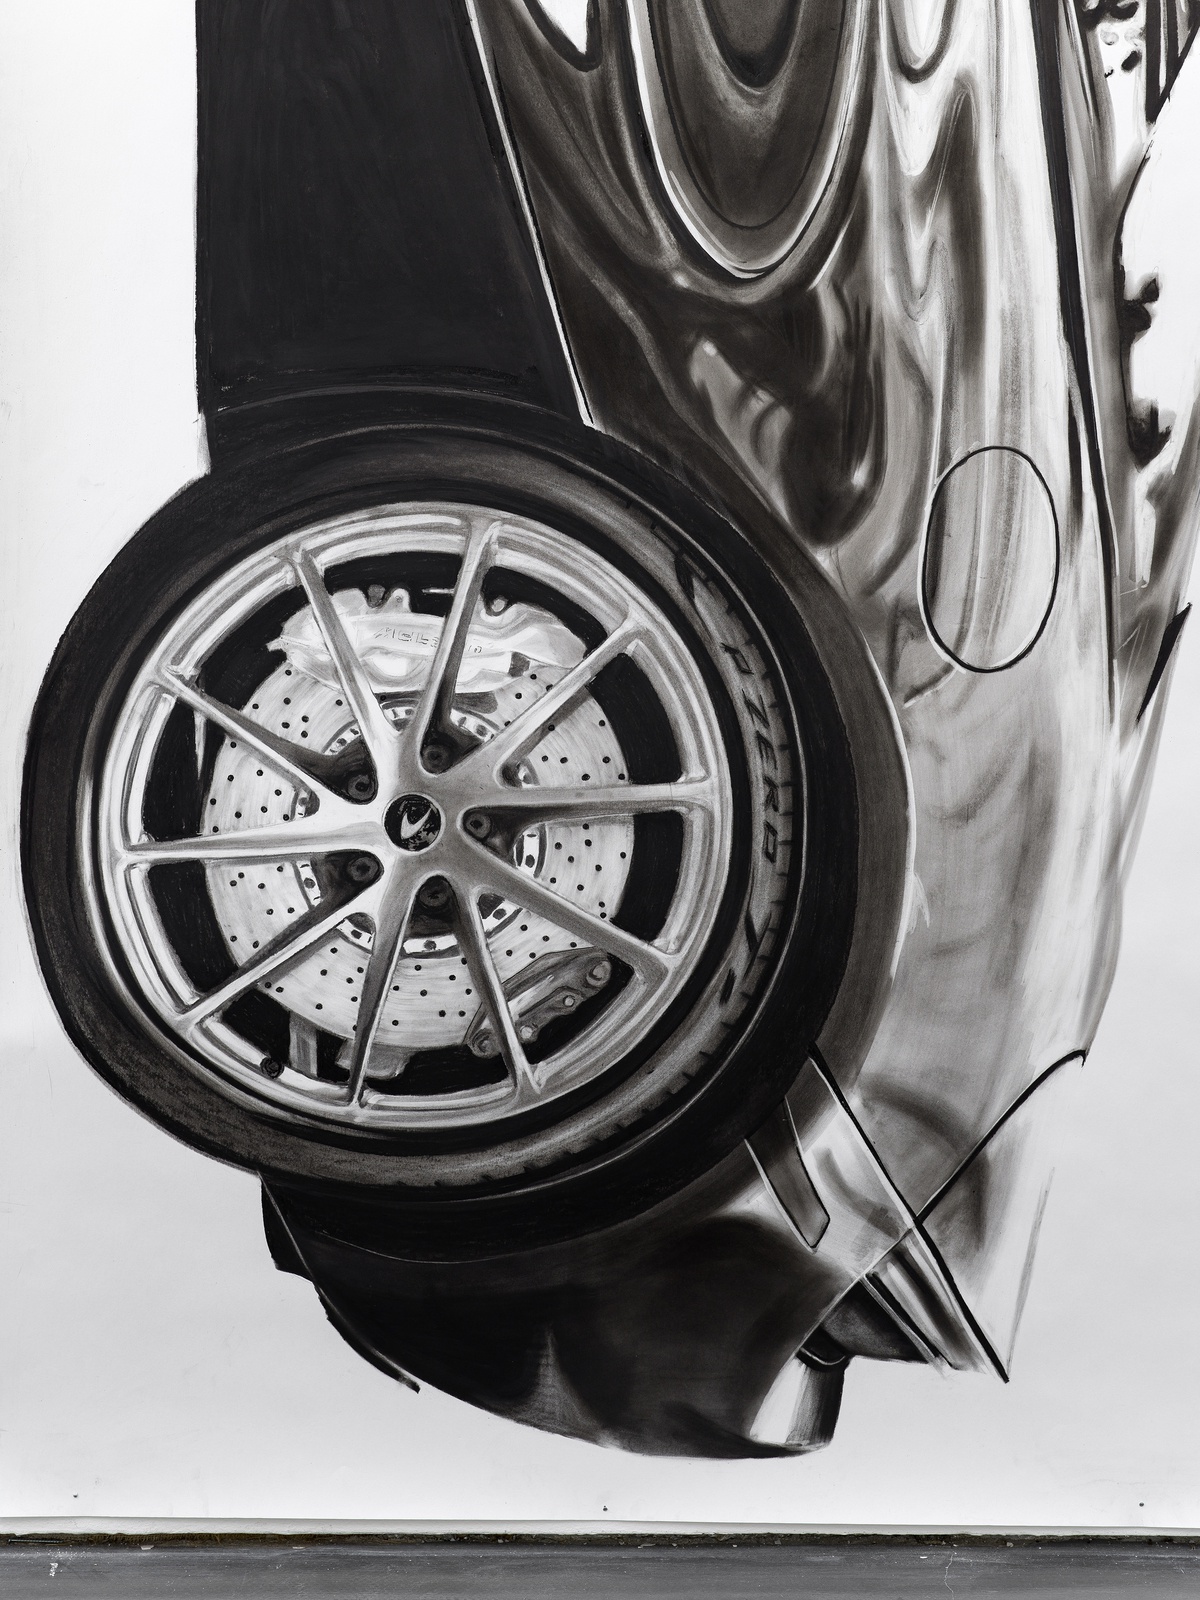 Mclaren 720s (Beauty of the beast), 2022(Detail)Charcoal on Paper